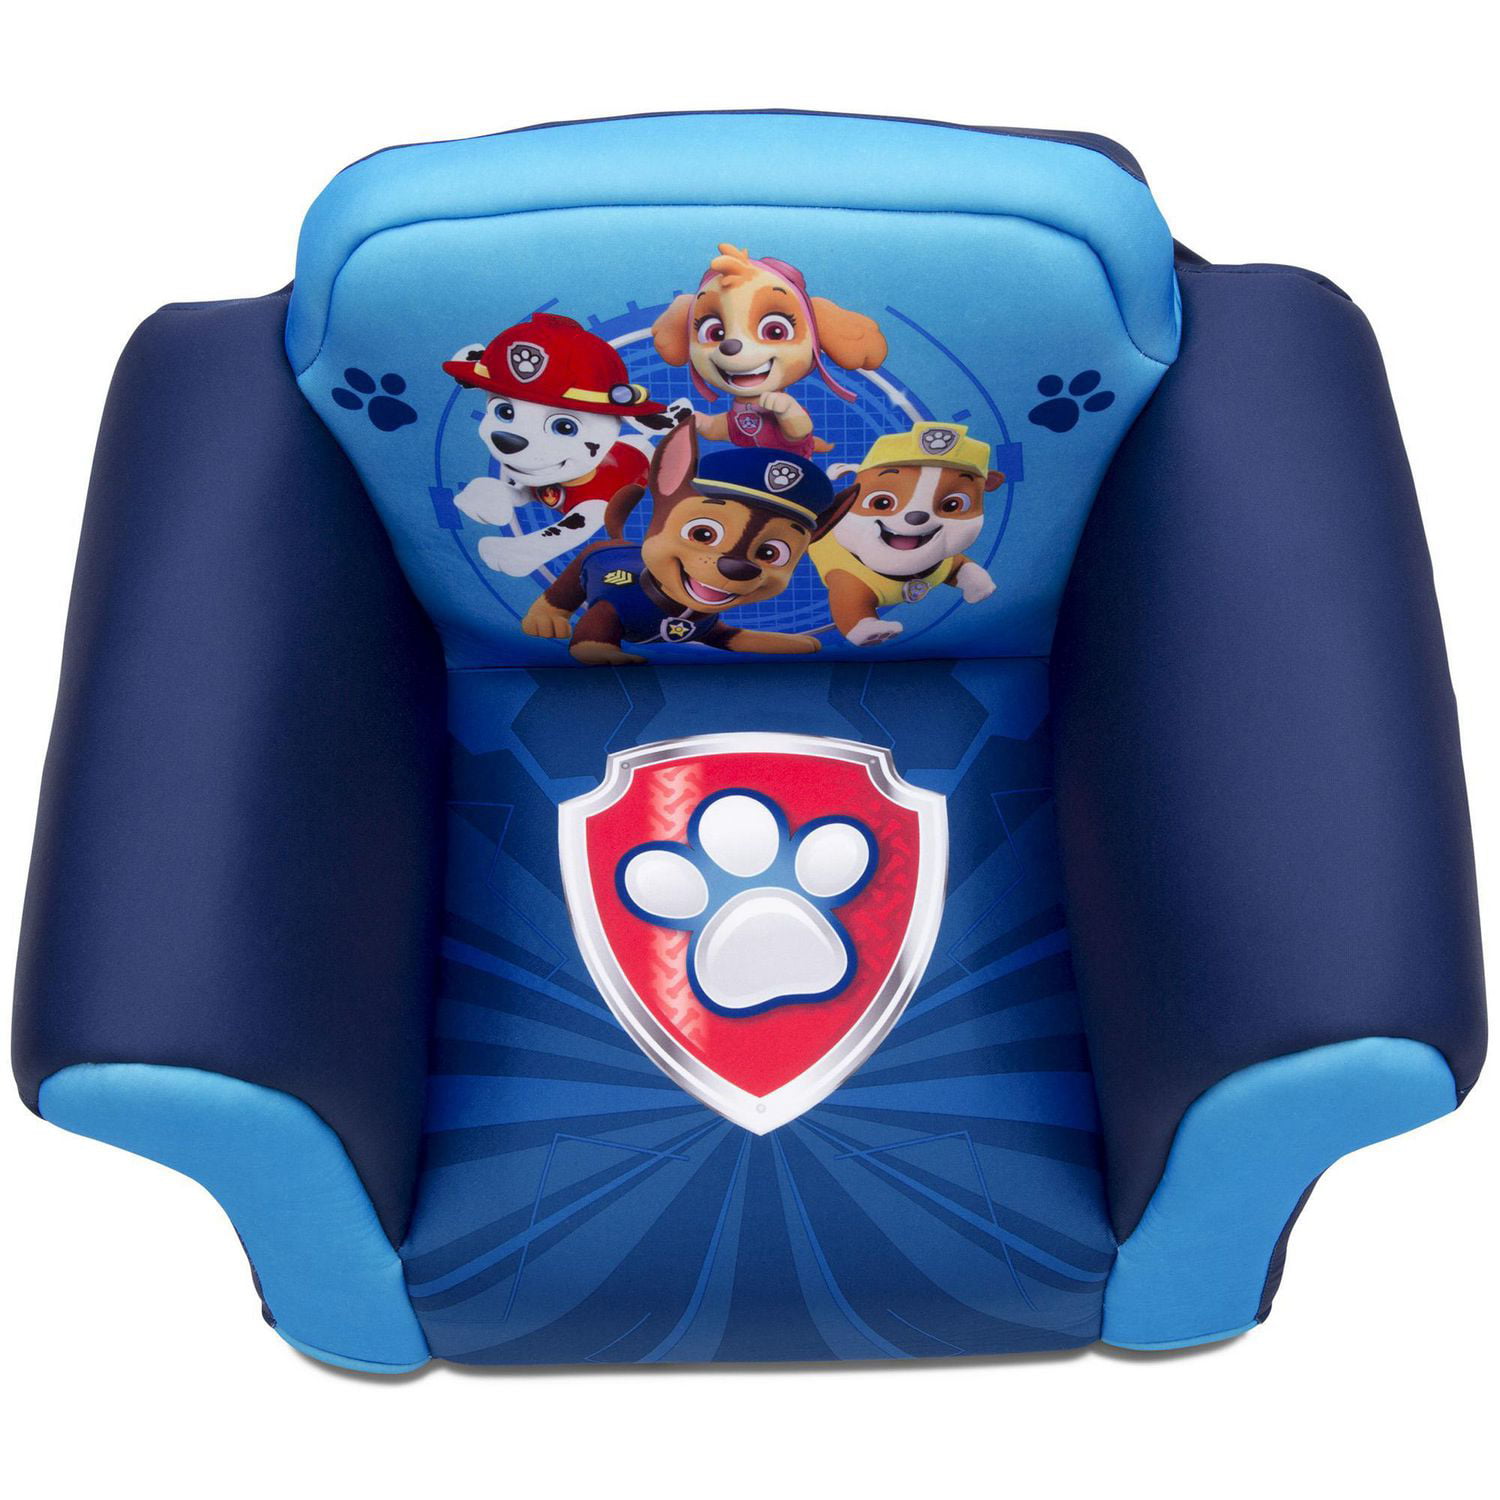 Nick Jr. - PAW Patrol training pants are now available at Walmart